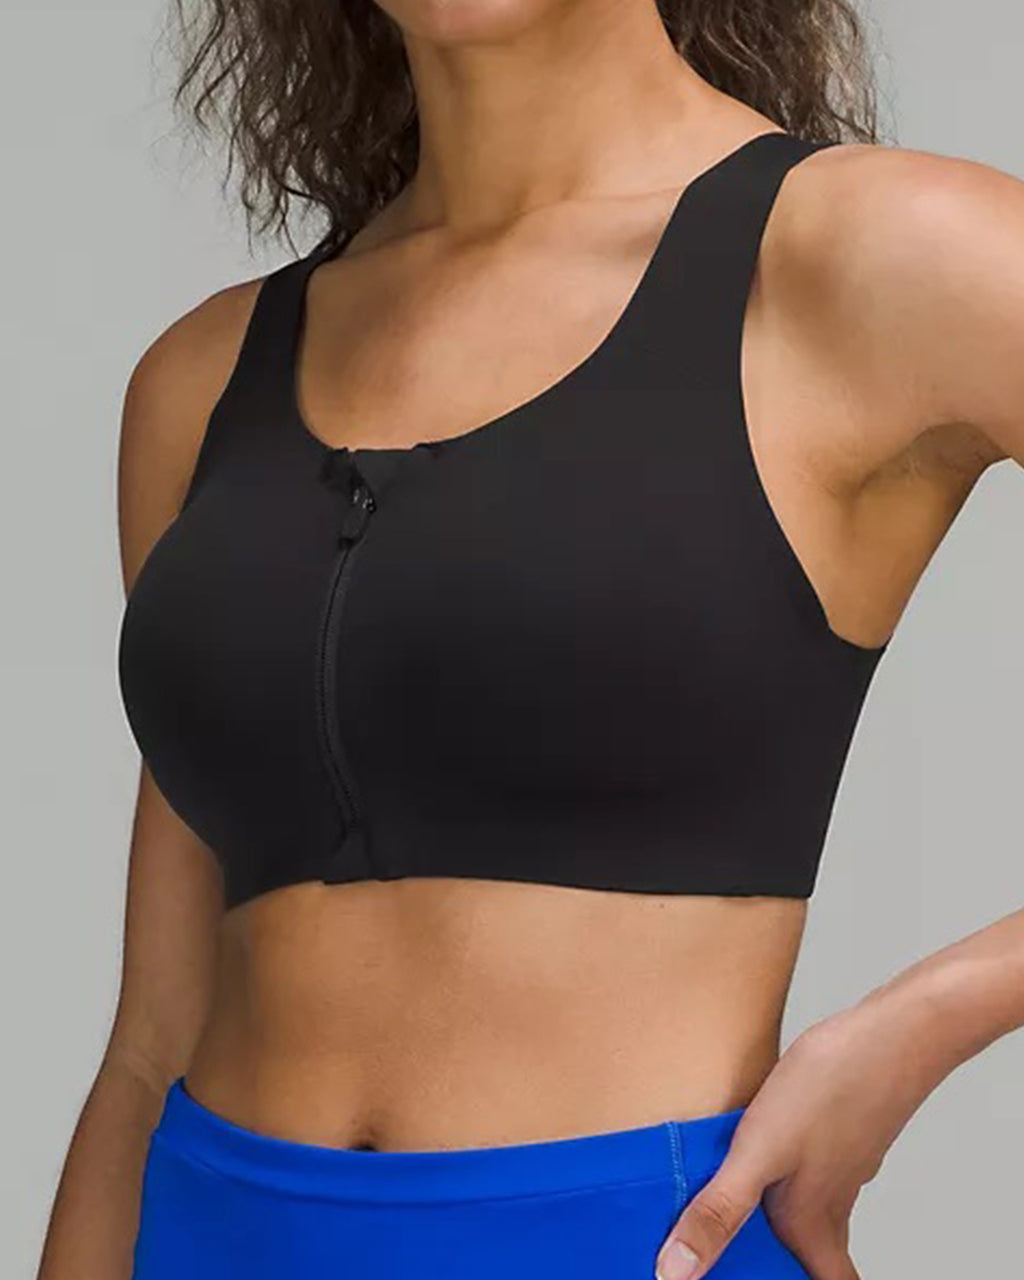 360-Degree Design Approach: The Enlite Bra, Instead sketching the product,  we started with the body itself. We draped our new soft, lightweight Ultralu  fabric onto a woman's body to inform the